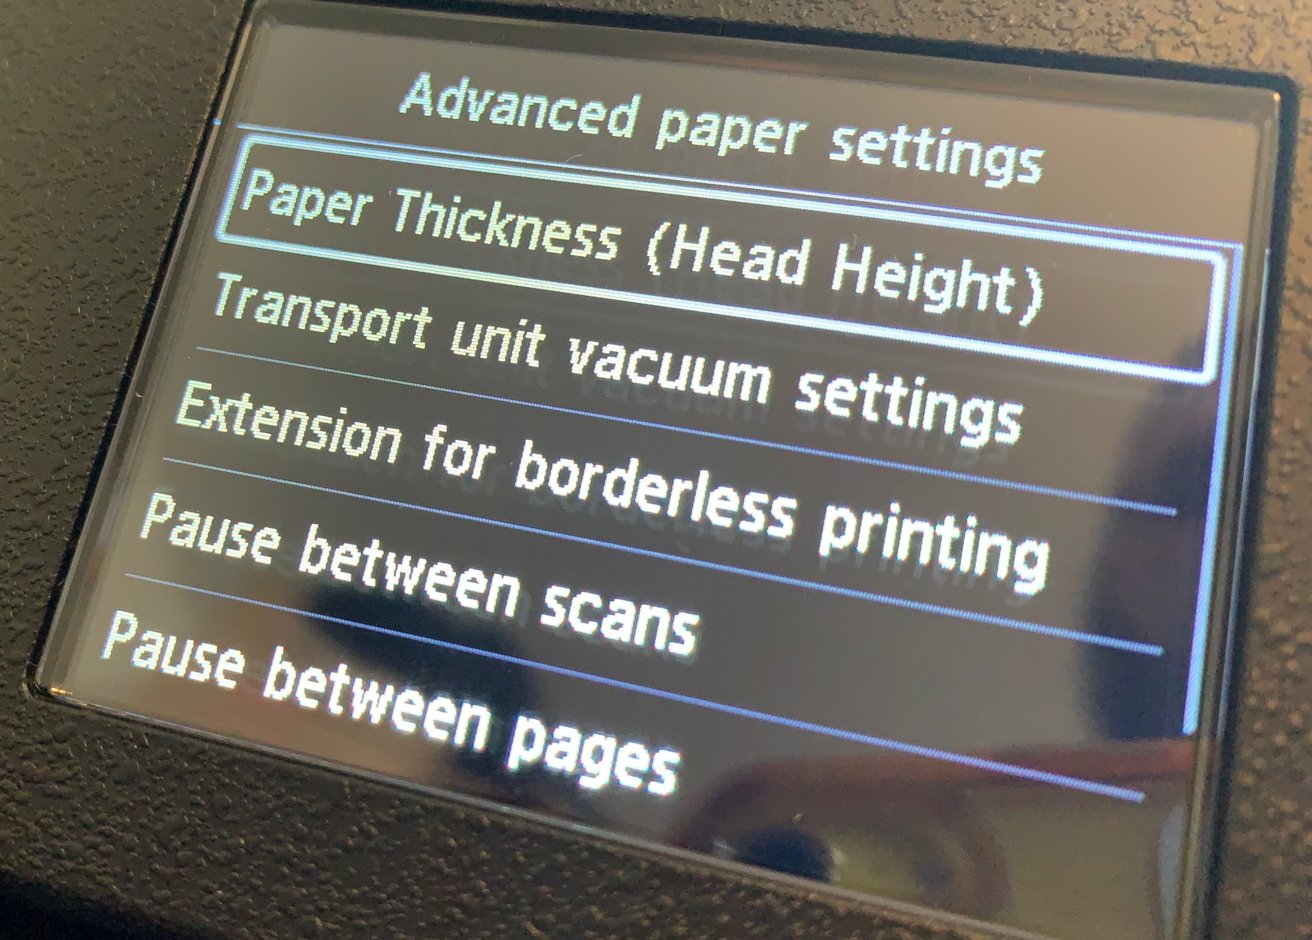 There are many different options and settings you can trigger from the printer's menu. 